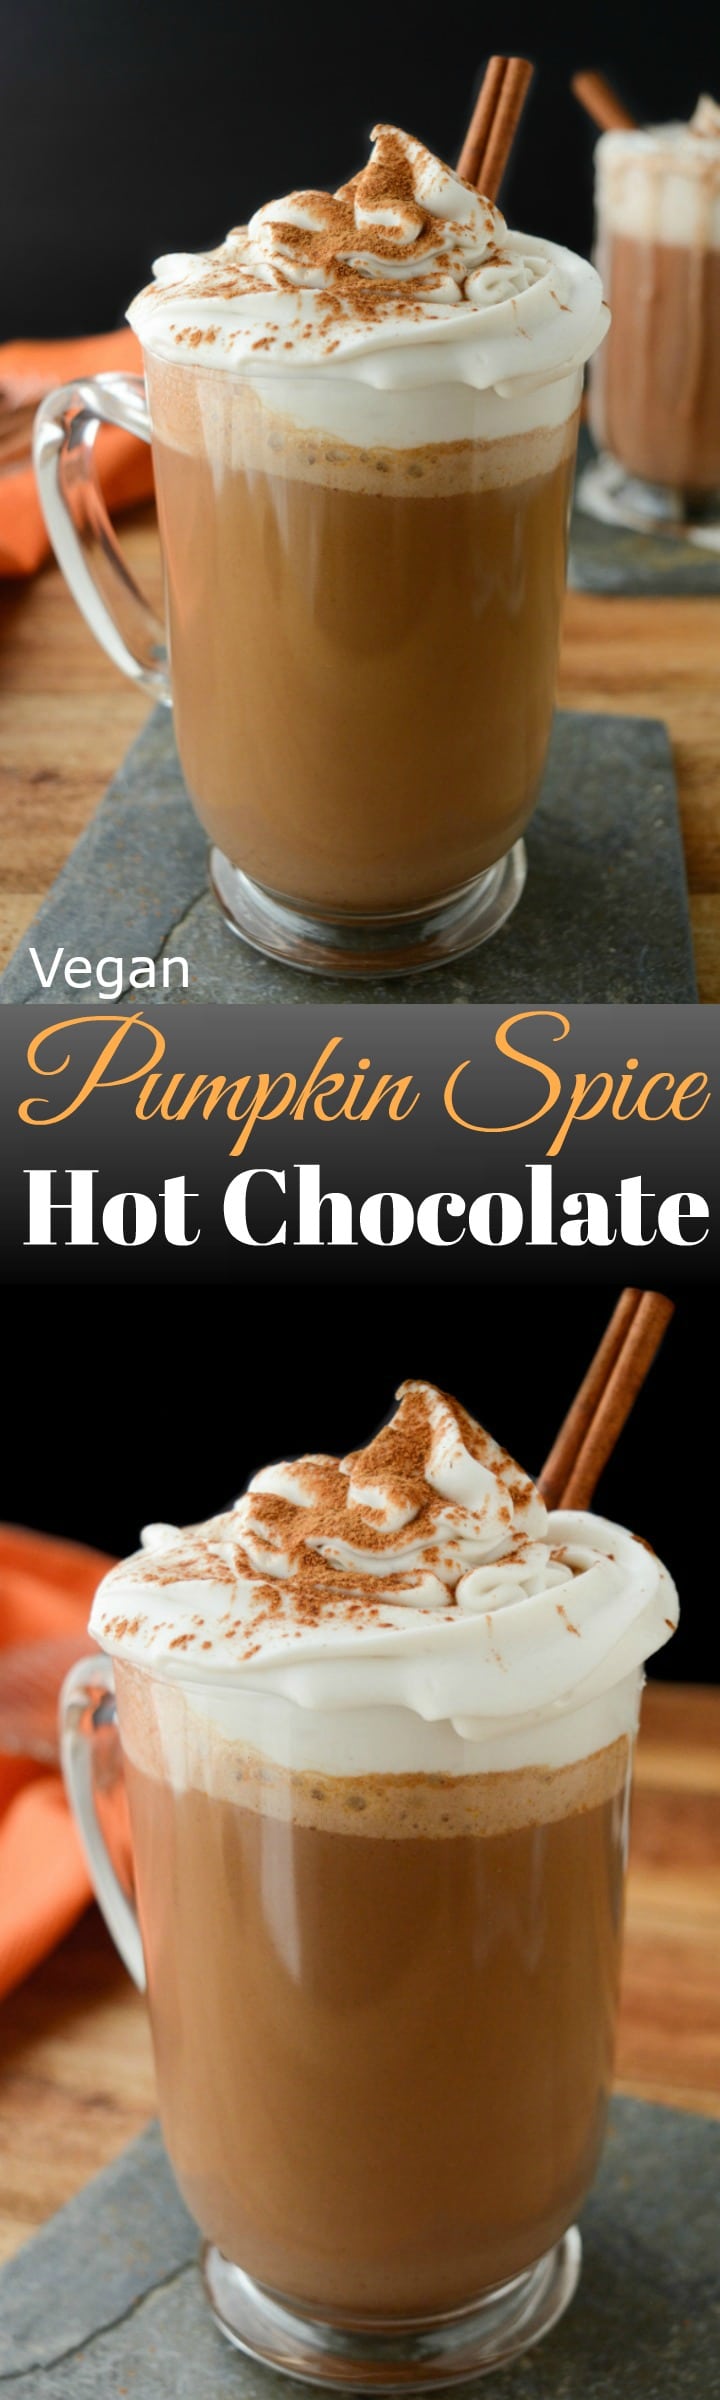 Cozy up this season with Vegan Pumpkin Spice Hot Chocolate! It’s made with real pumpkin puree! Make a batch for the family or bring it in the slow cooker to your next holiday gathering. dairy-free